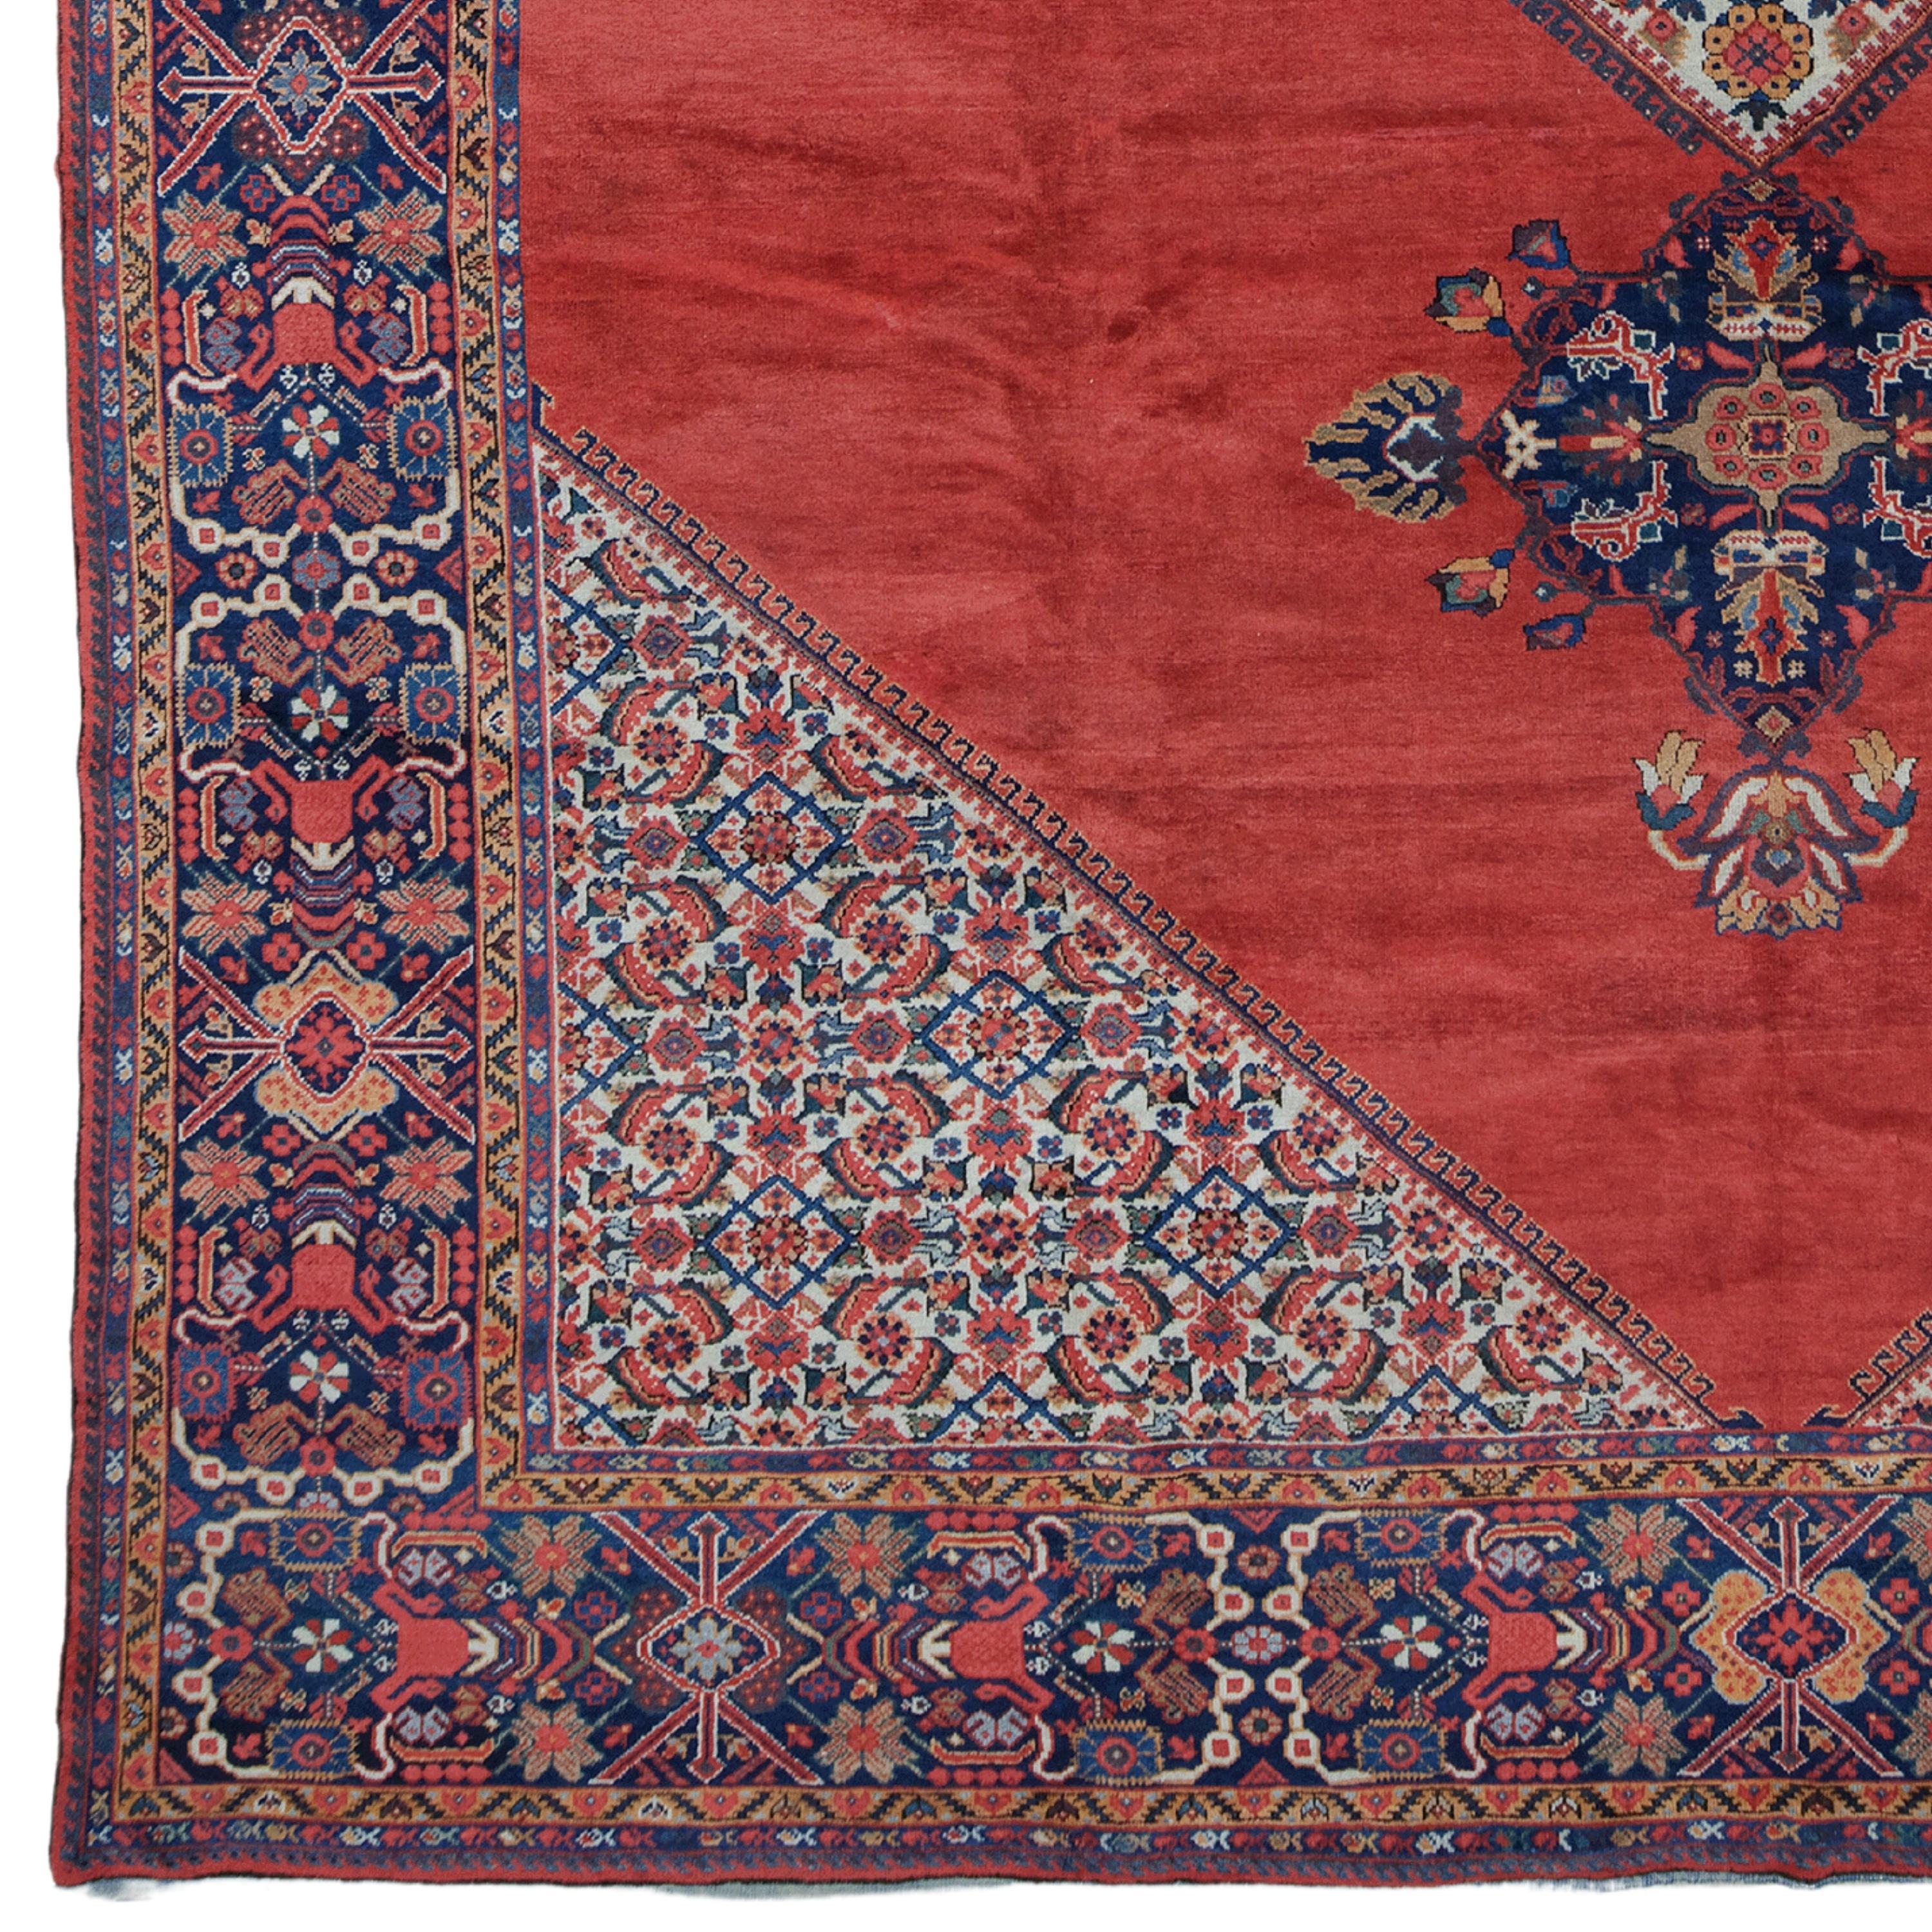 An Aesthetic Beauty: Antique Mahal Carpet of the End of the 19th Century

If you want to add historical and artistic value to your home, this antique carpet is for you. This carpet is a Mahal carpet woven in the Mahal region at the end of the 19th